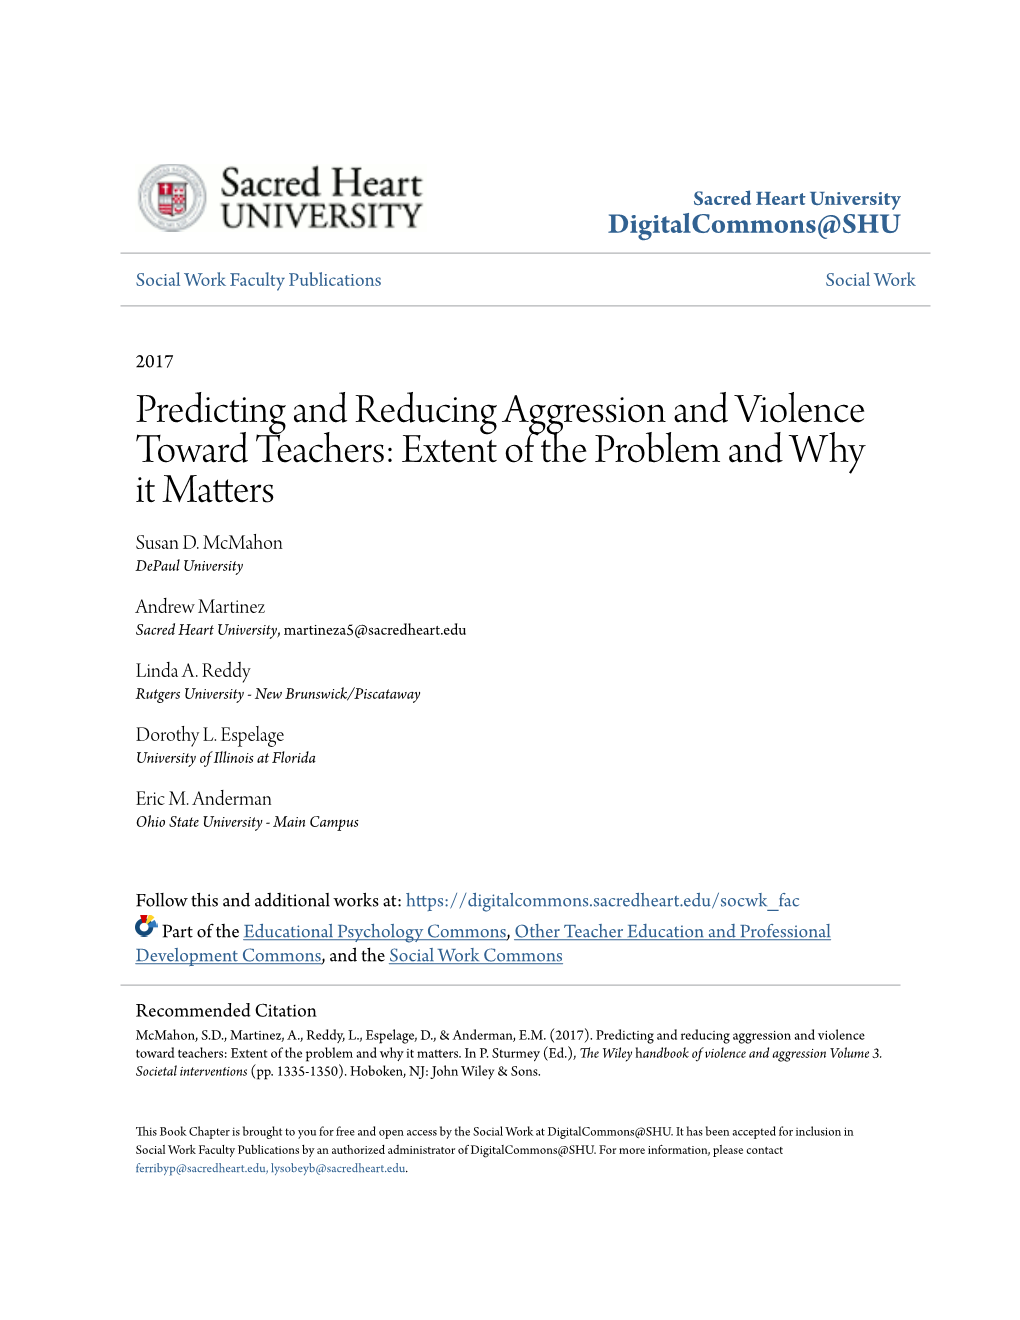 Predicting and Reducing Aggression and Violence Toward Teachers: Extent of the Problem and Why It Matters Susan D